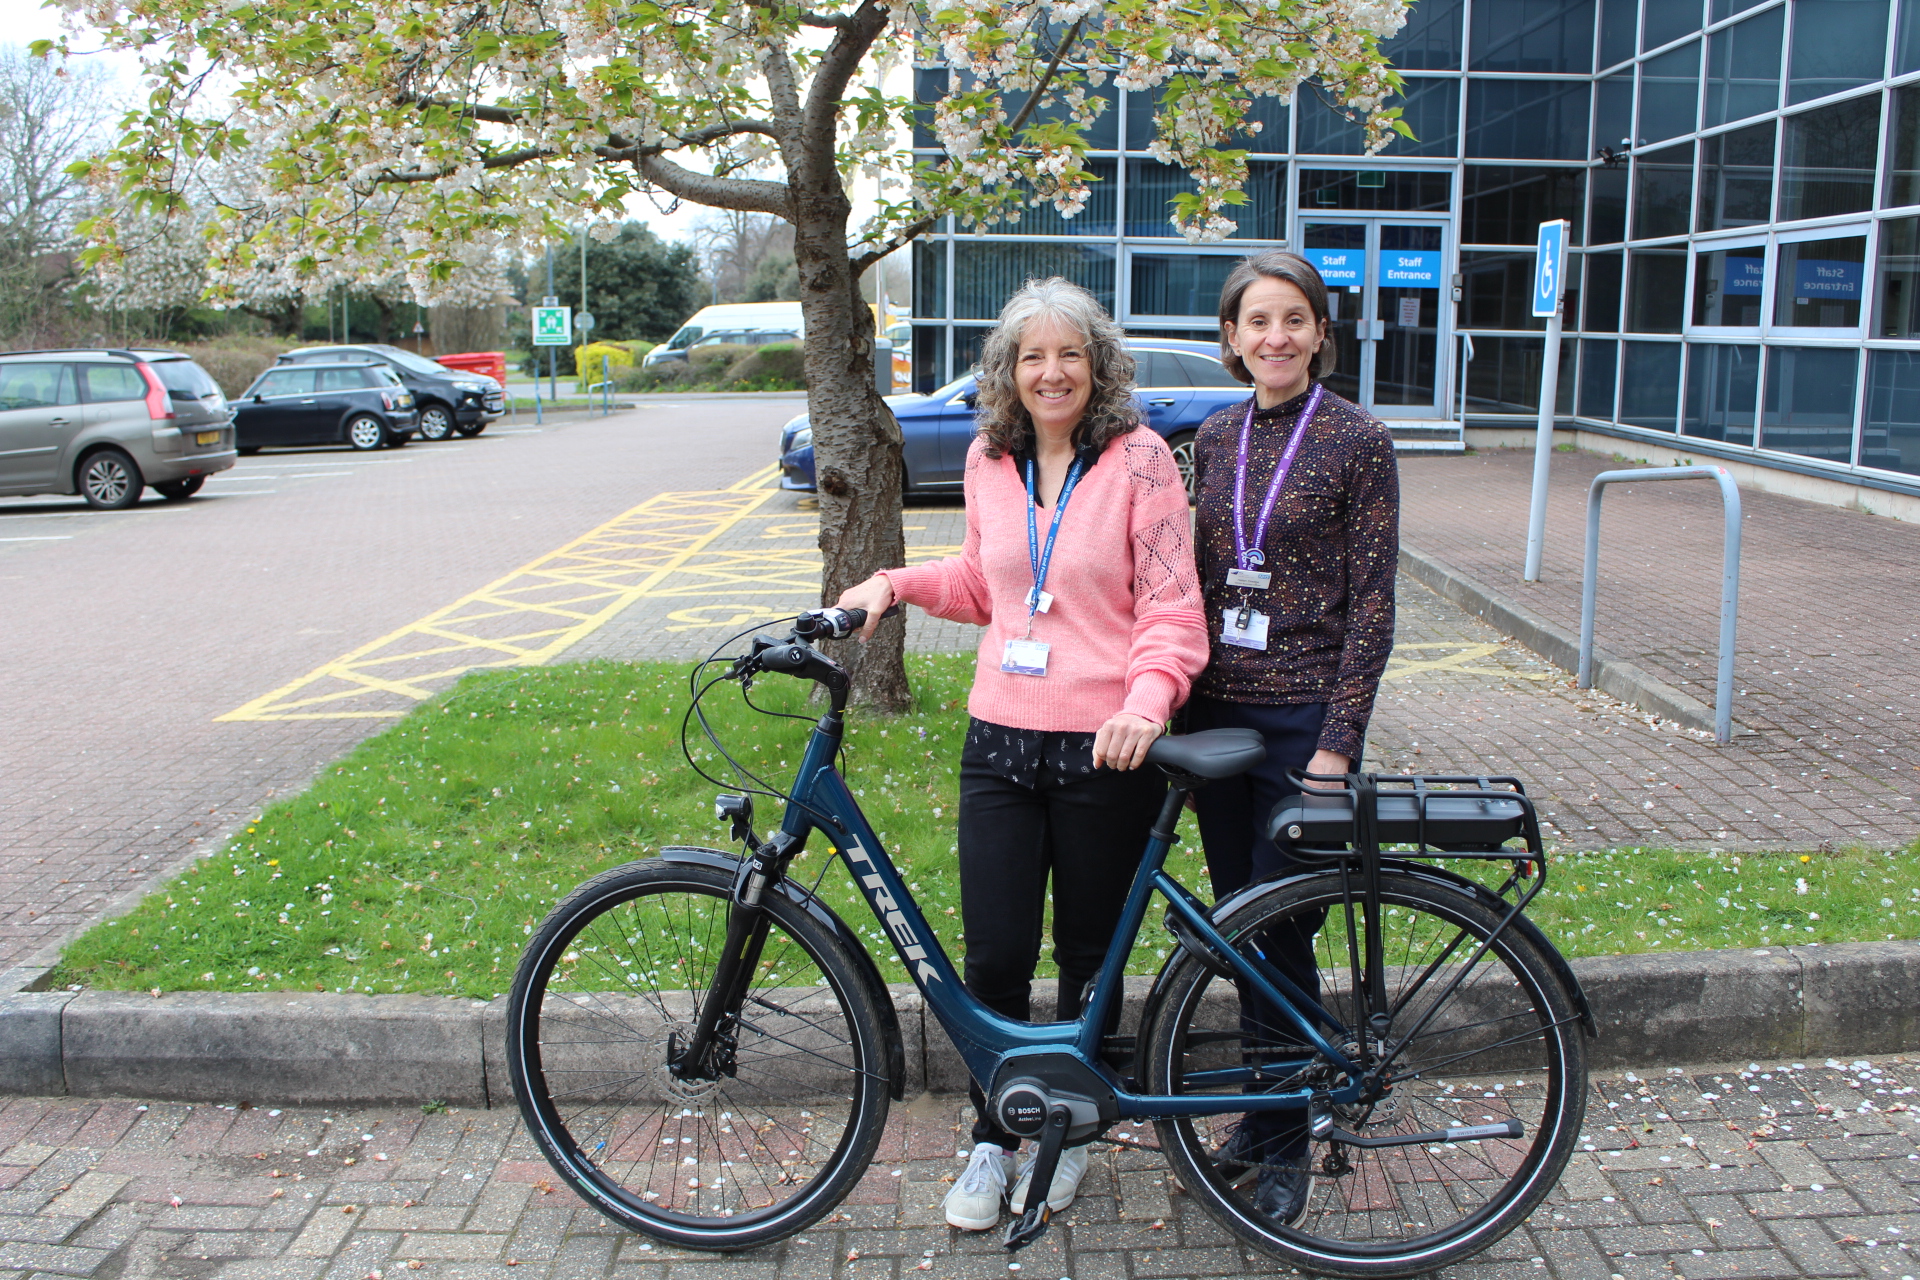 Chris Jones and Helen Dredge stood in front of a tree in a car park with a blue electric bike